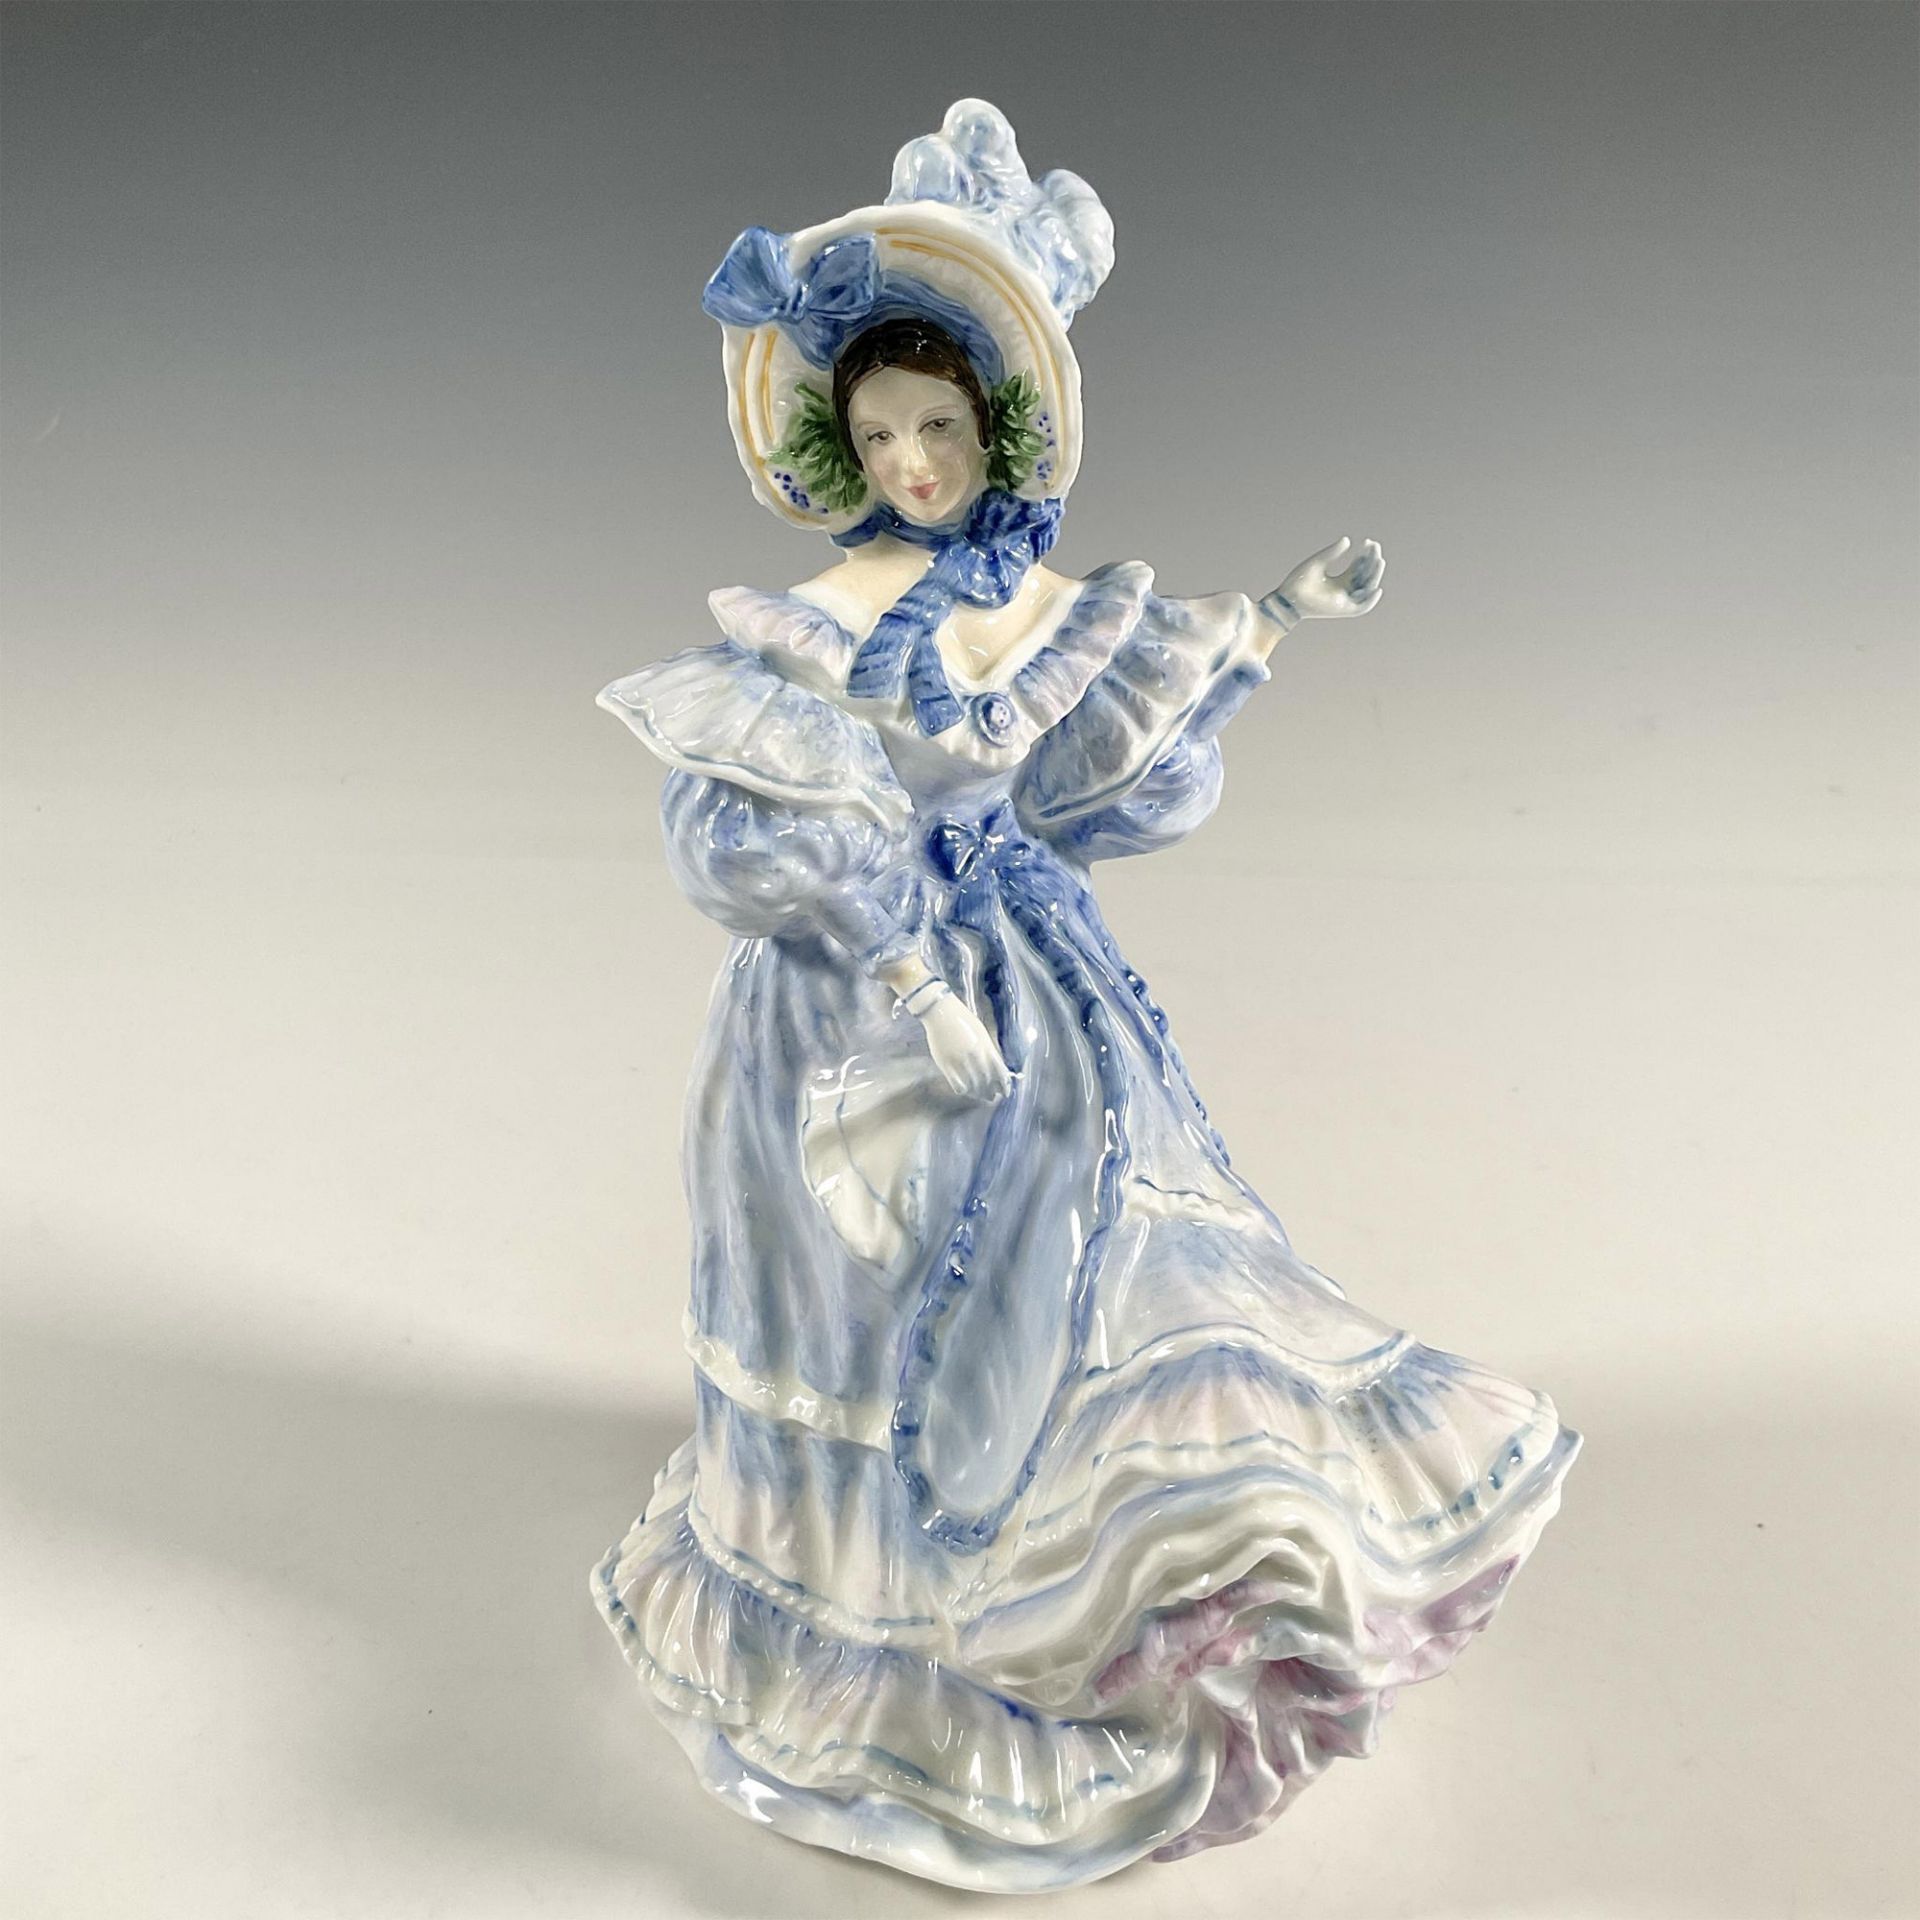 Forget Me Not - HN3700 - Royal Doulton Figurine